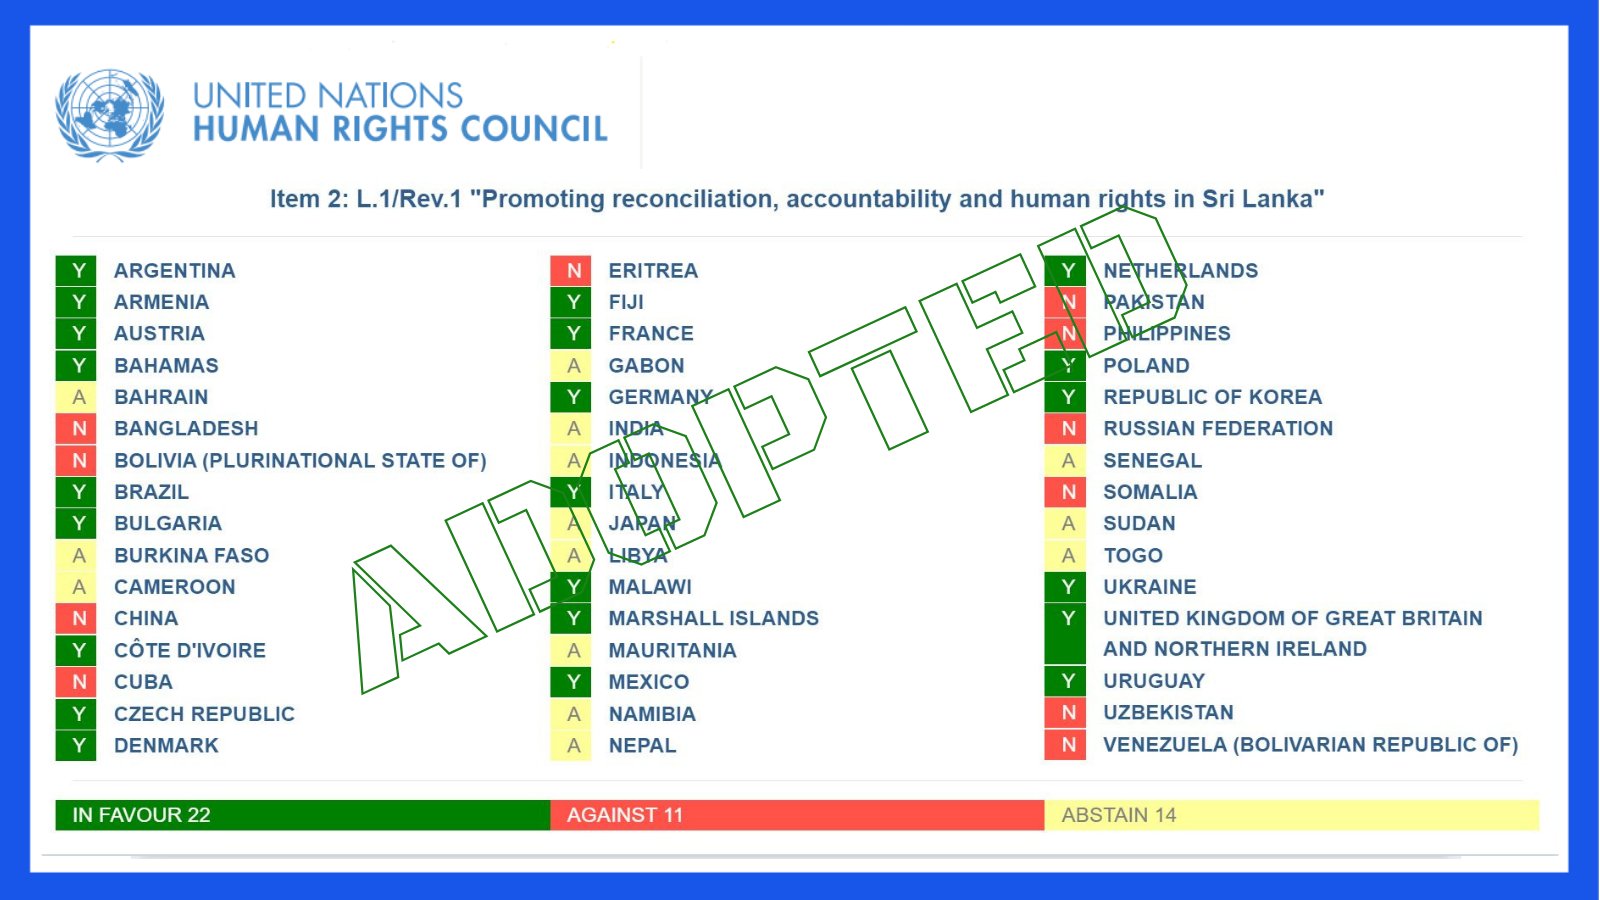 UNHRC adopts revised resolution to enhance monitoring on human rights in Sri Lanka